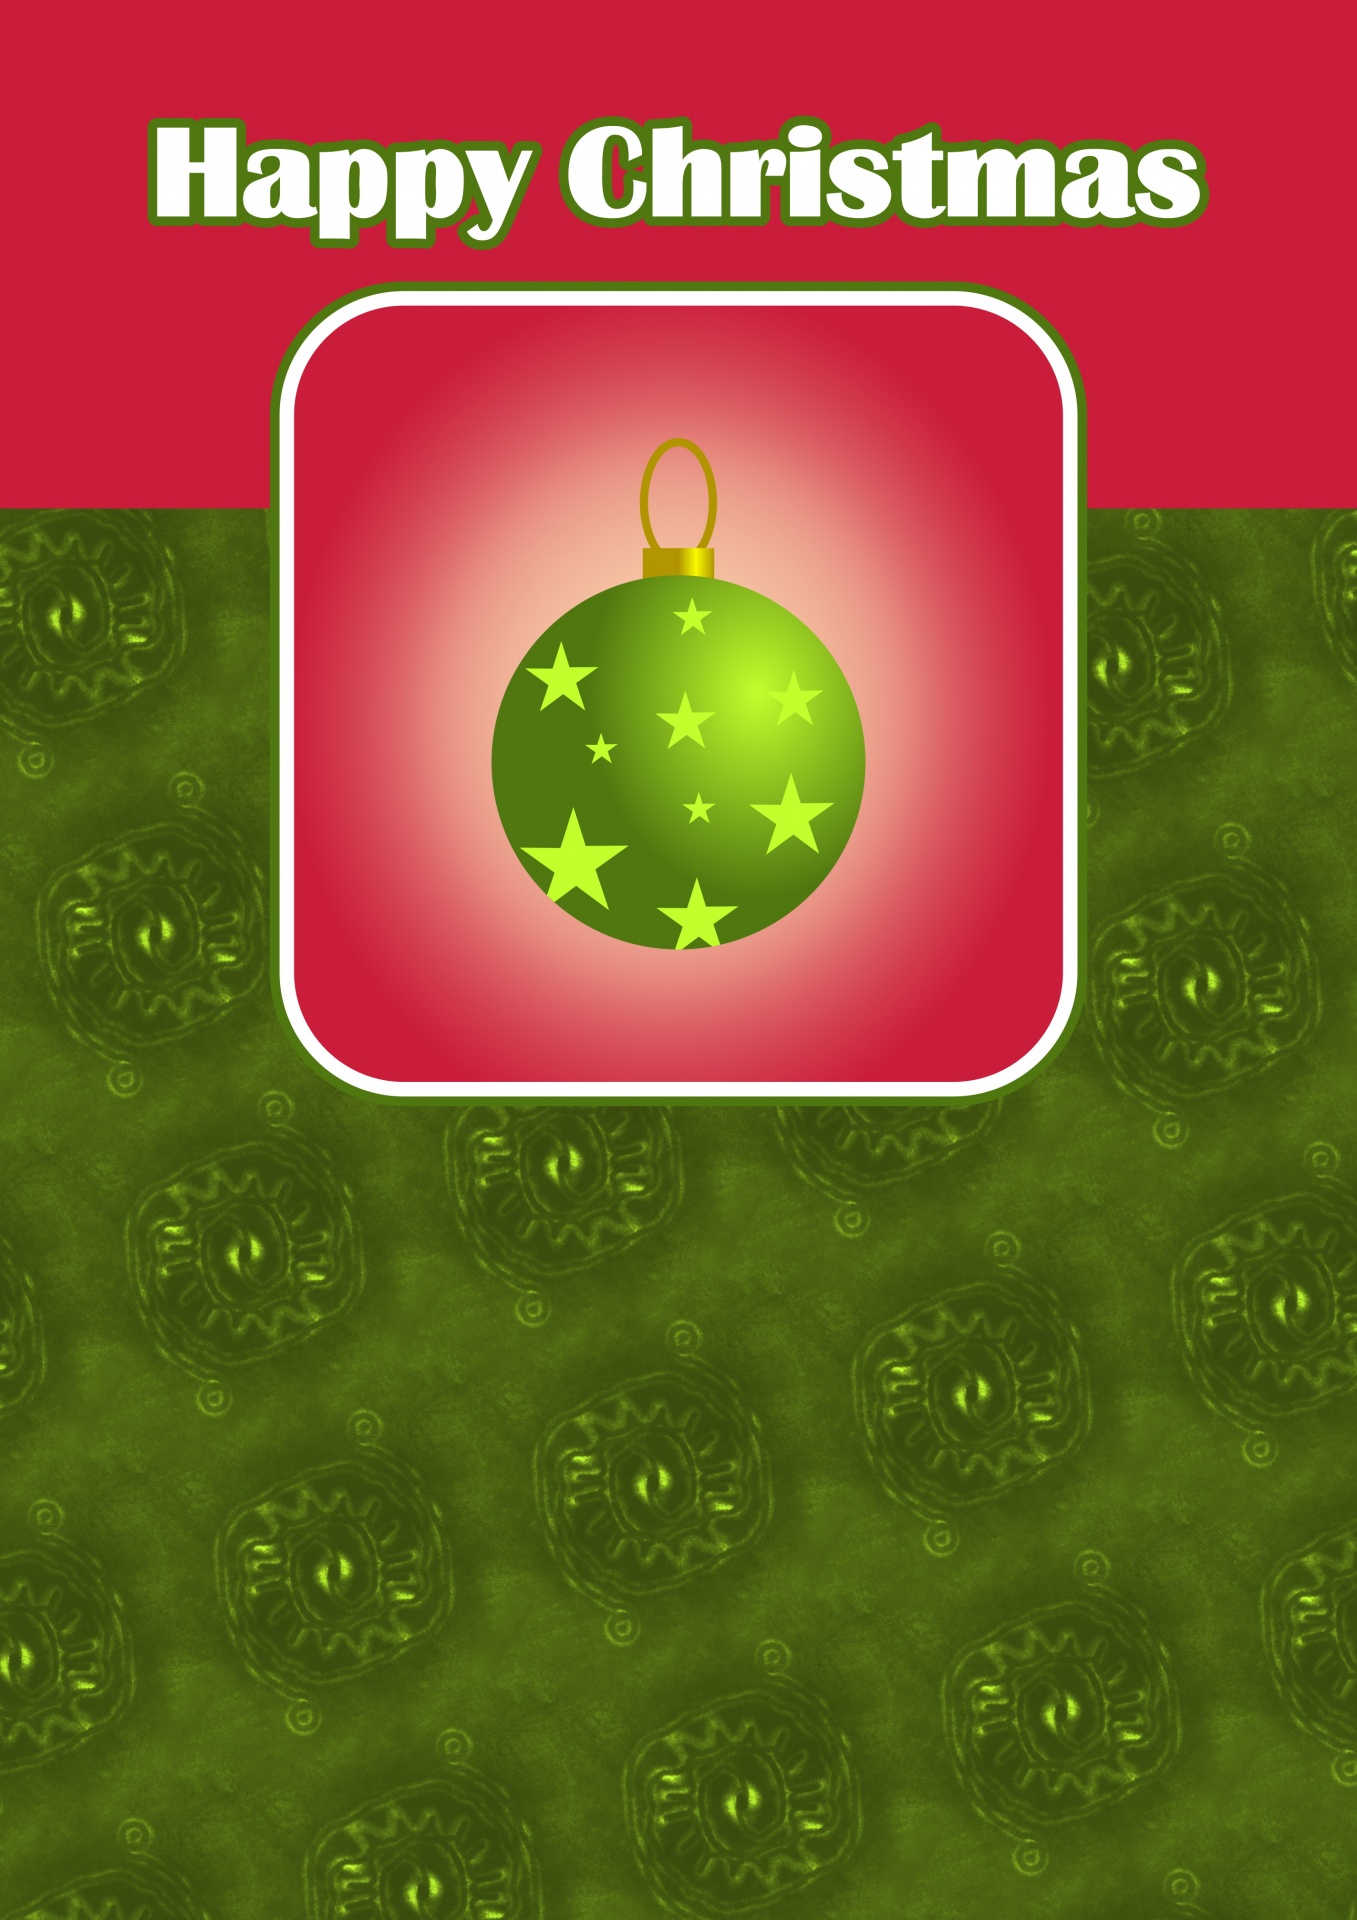 free clip art for holiday cards - photo #9